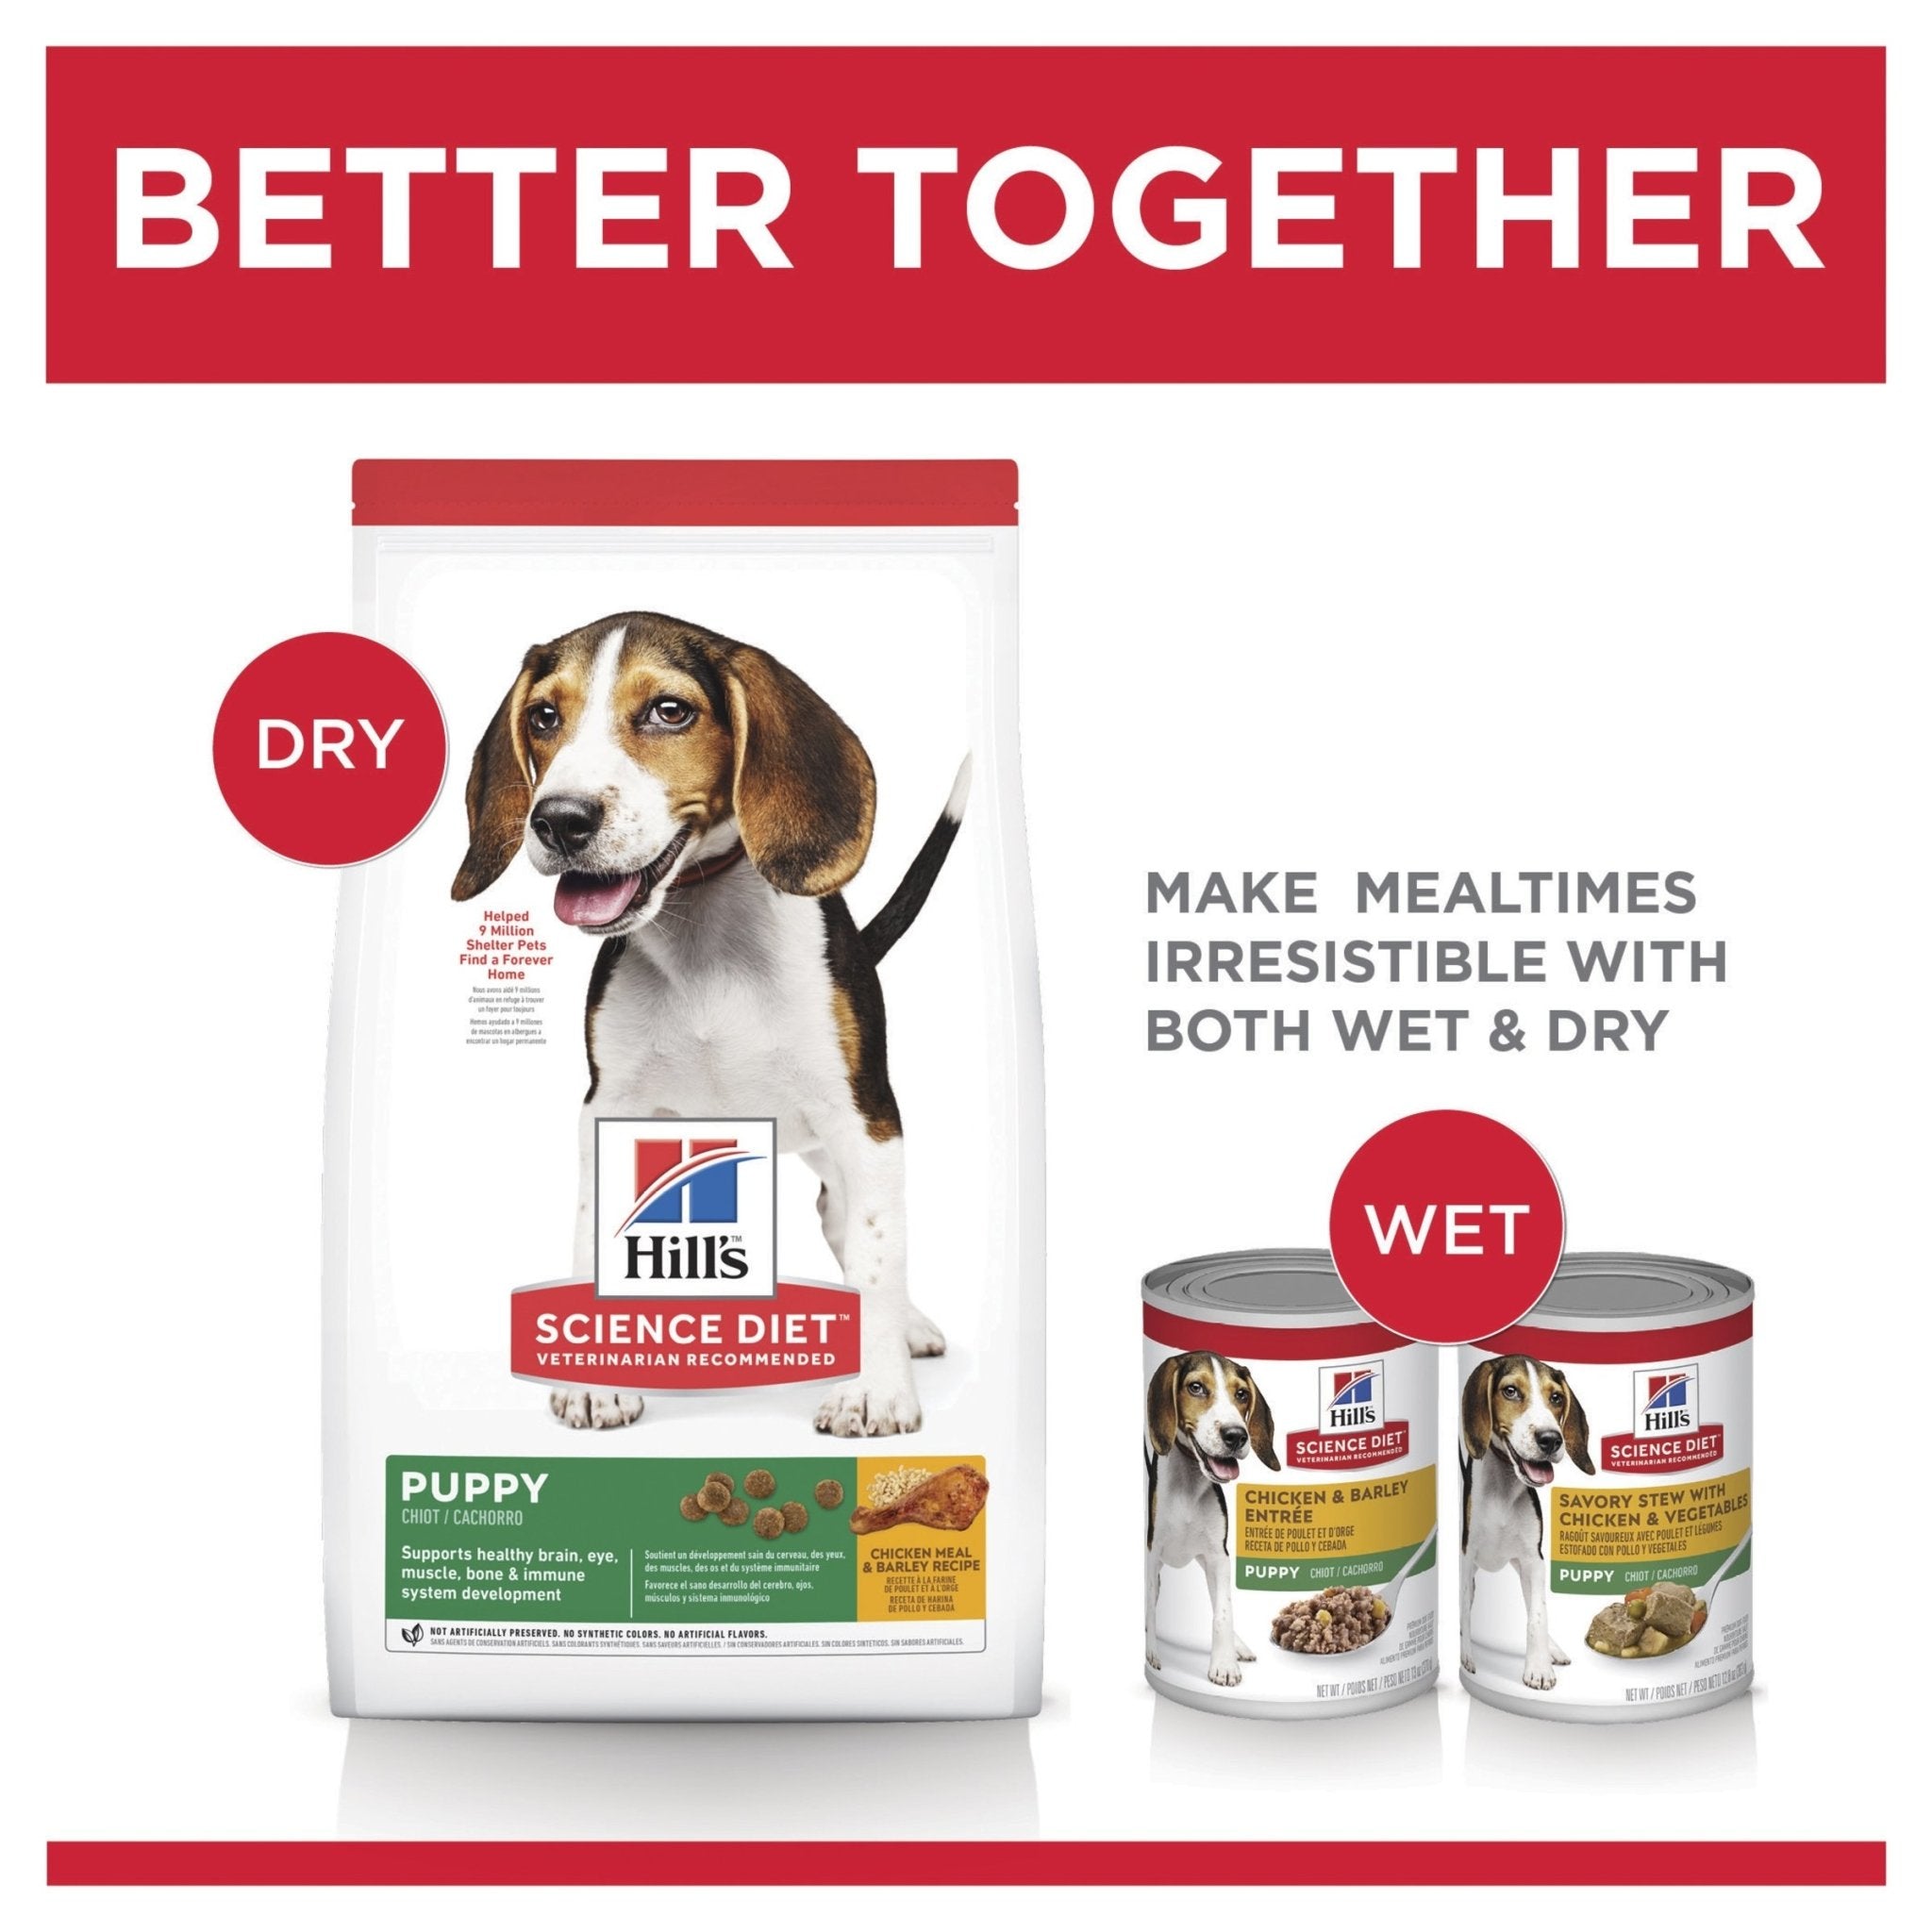 Hill's Science Diet Puppy Dry Dog Food